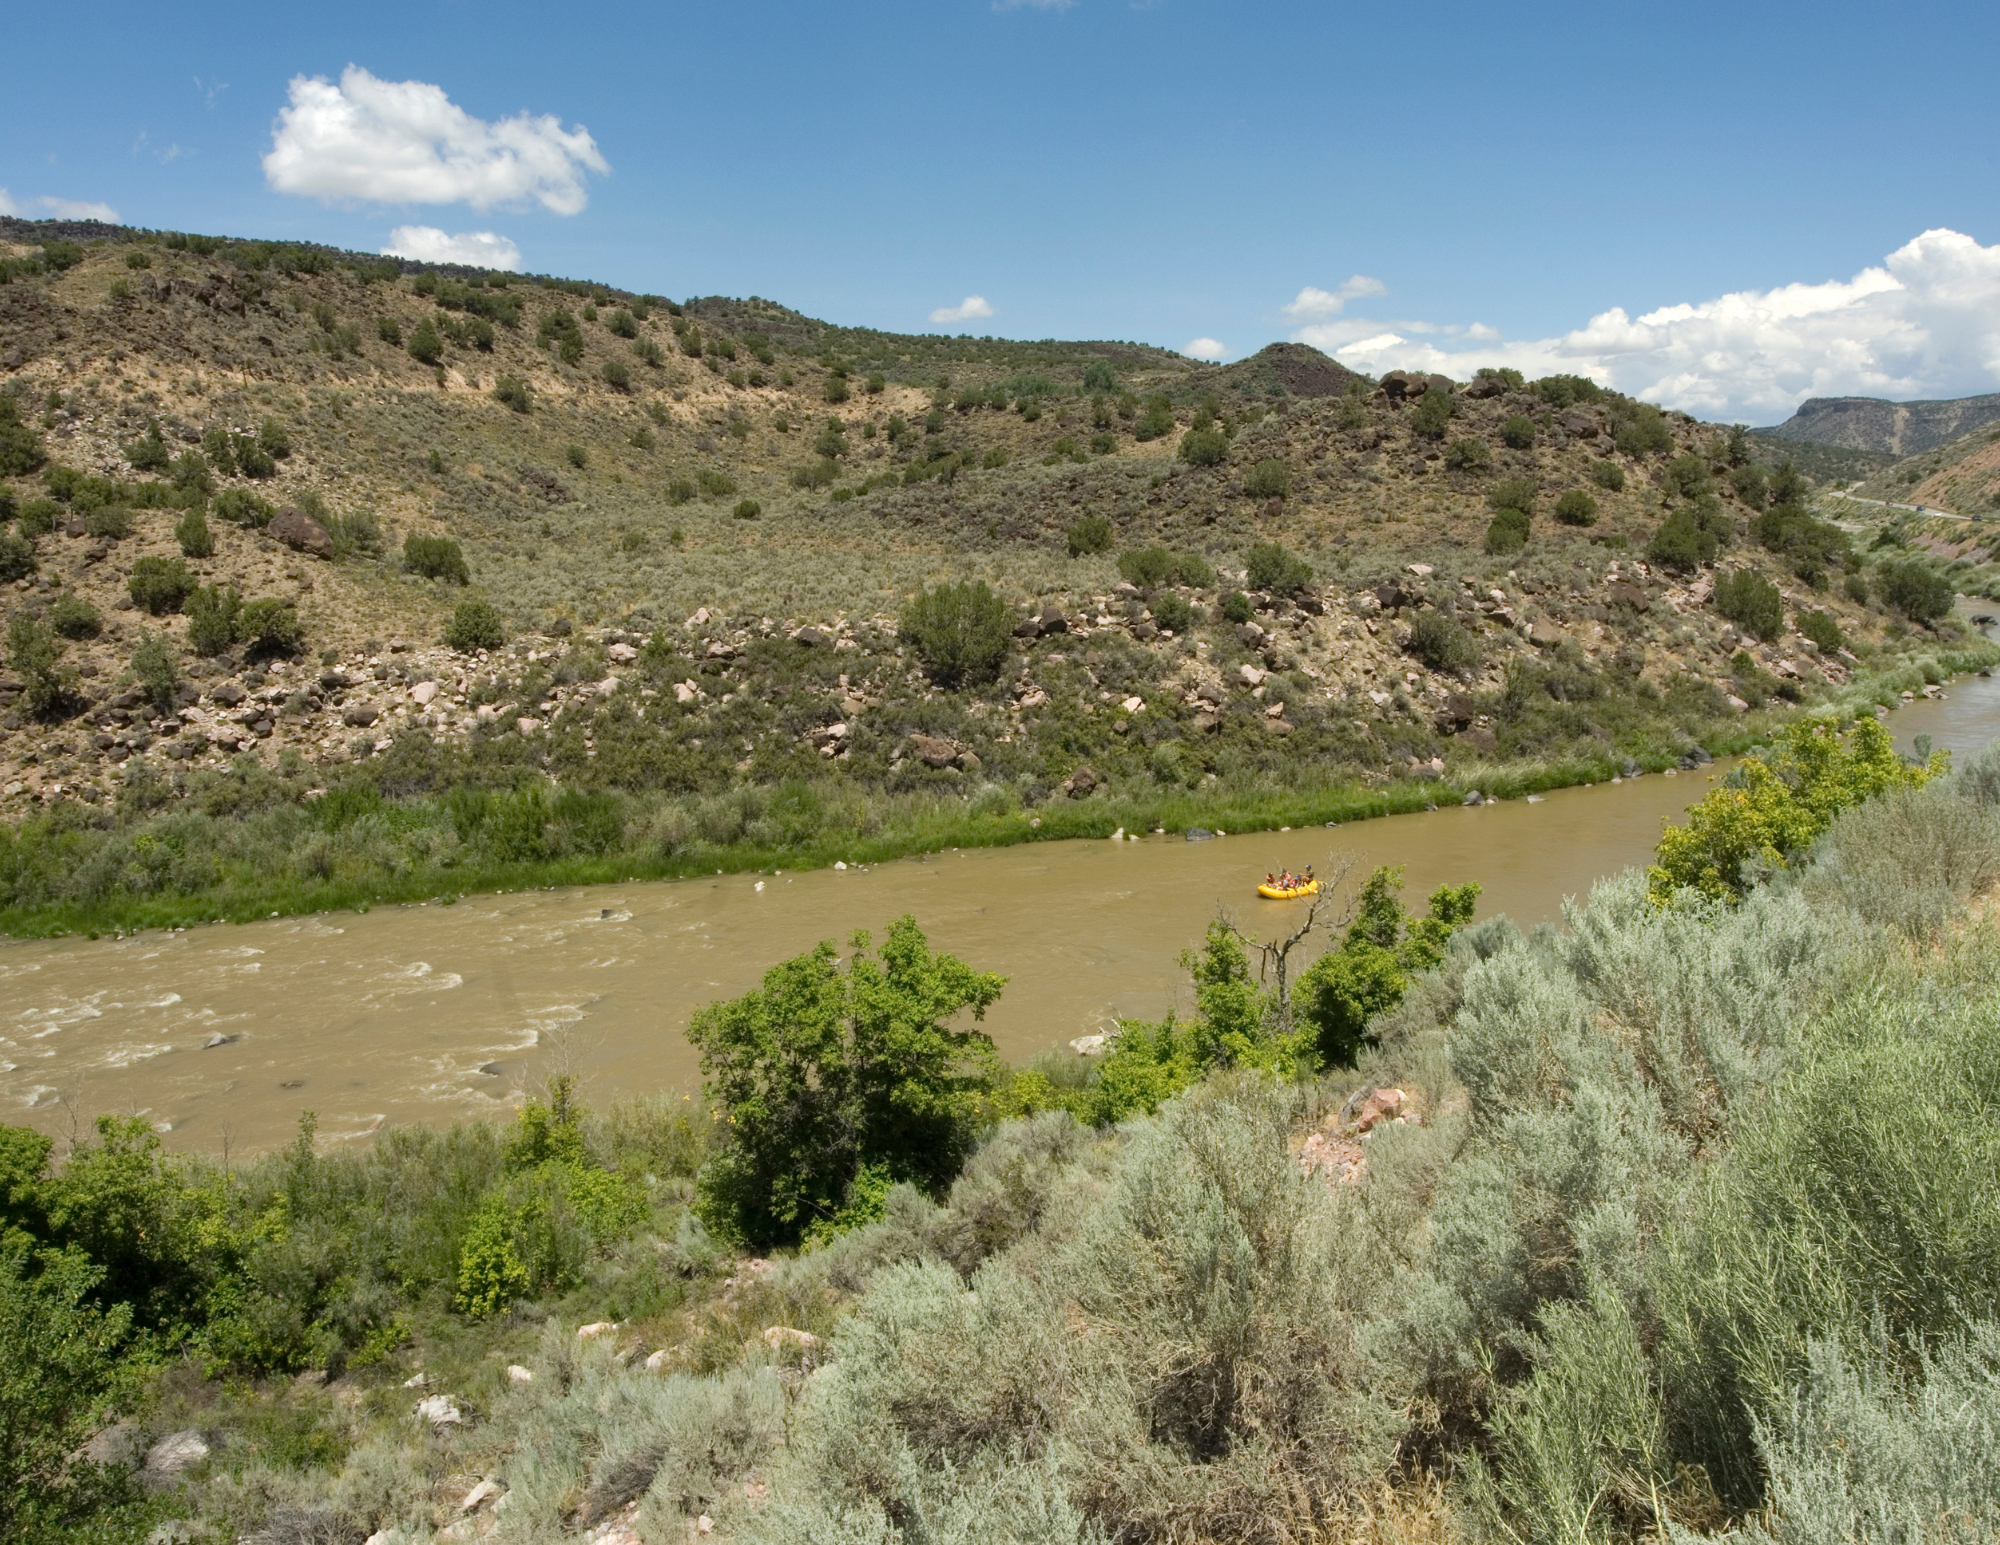  New Mexico Wild Celebrates Reintroduction of Legislation to Protect the Gila, San Francisco rivers as Wild and Scenic